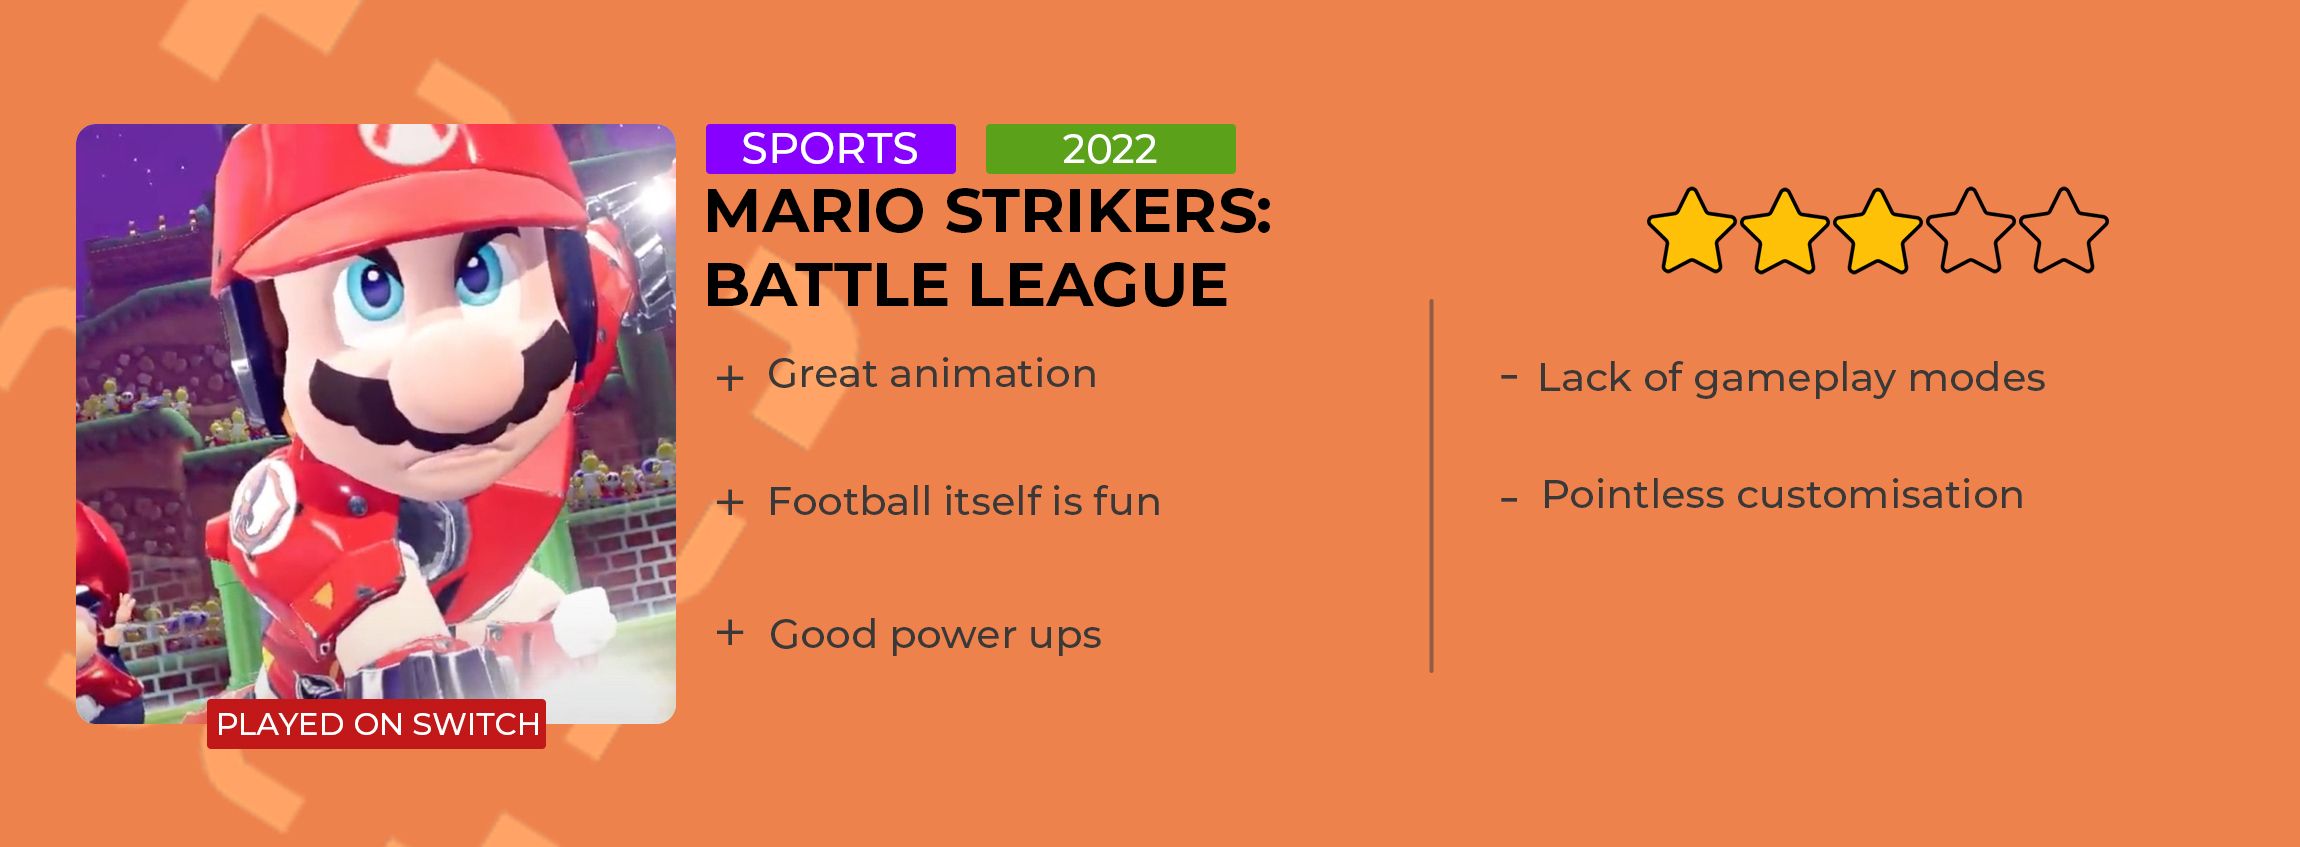 Mario Strikers review card